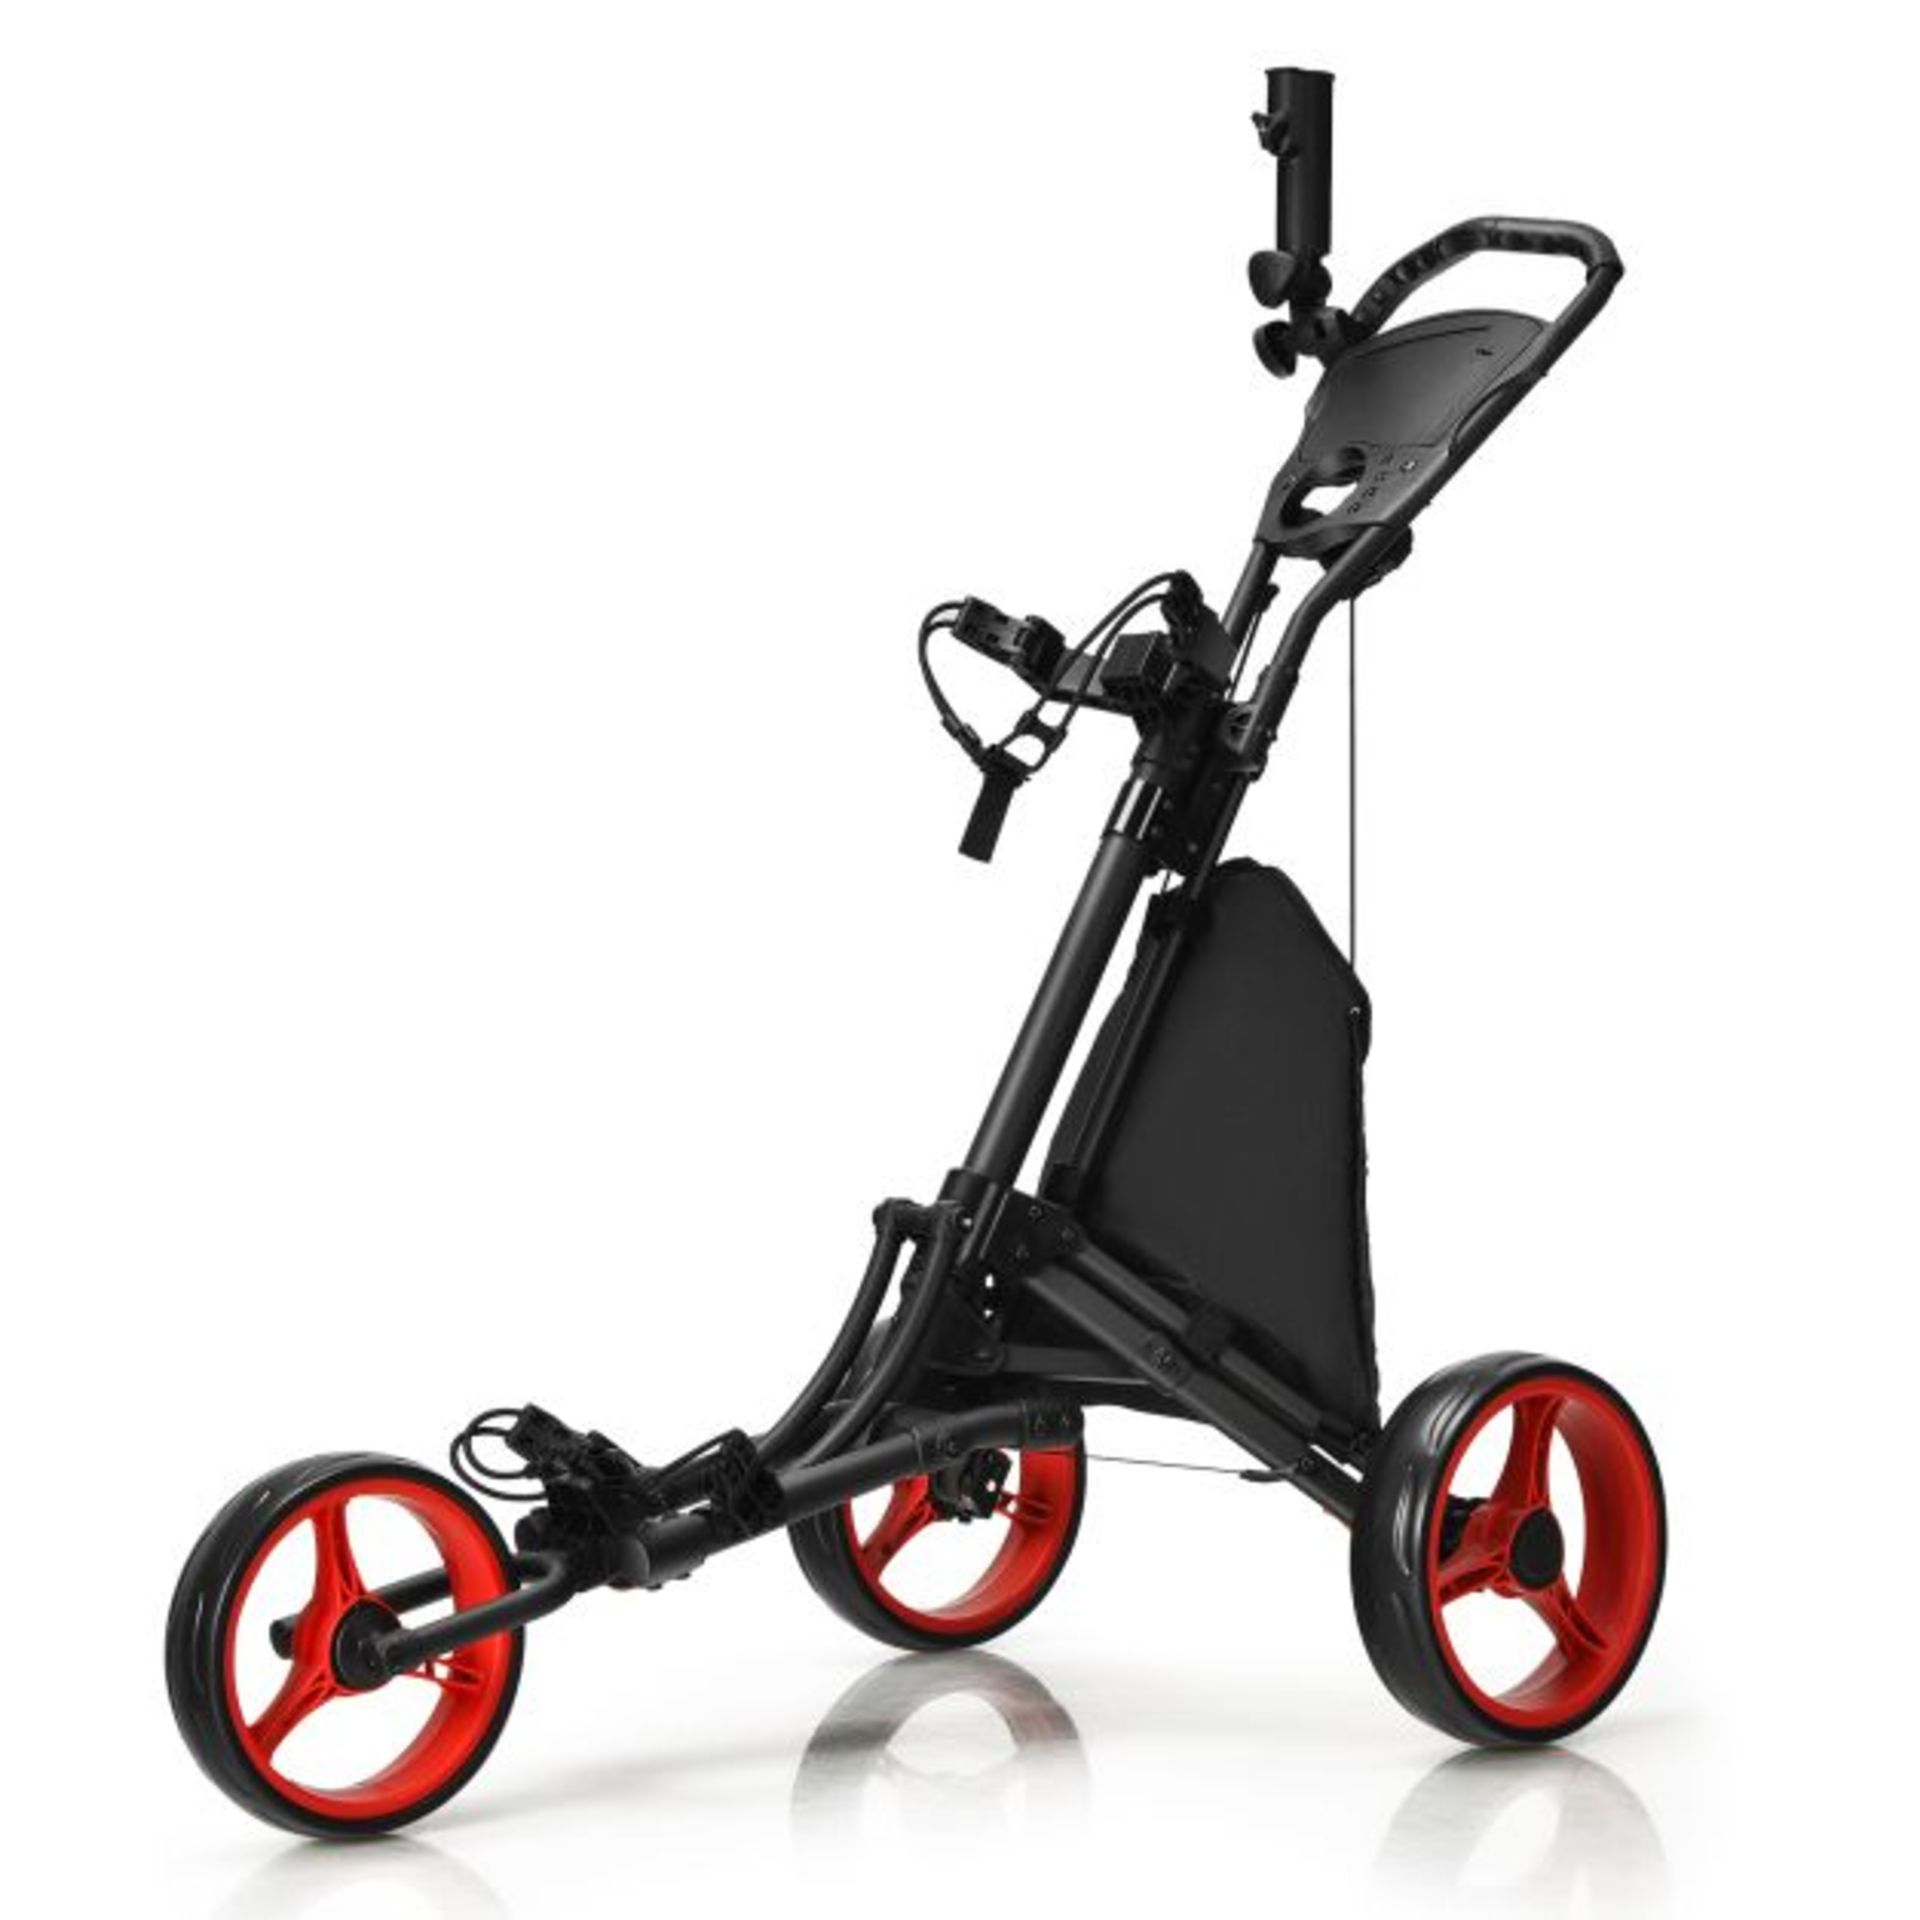 3 Wheel Golf Push Pull Cart with Adjustable Height Handle. - SR36. This collapsible cart with wheels